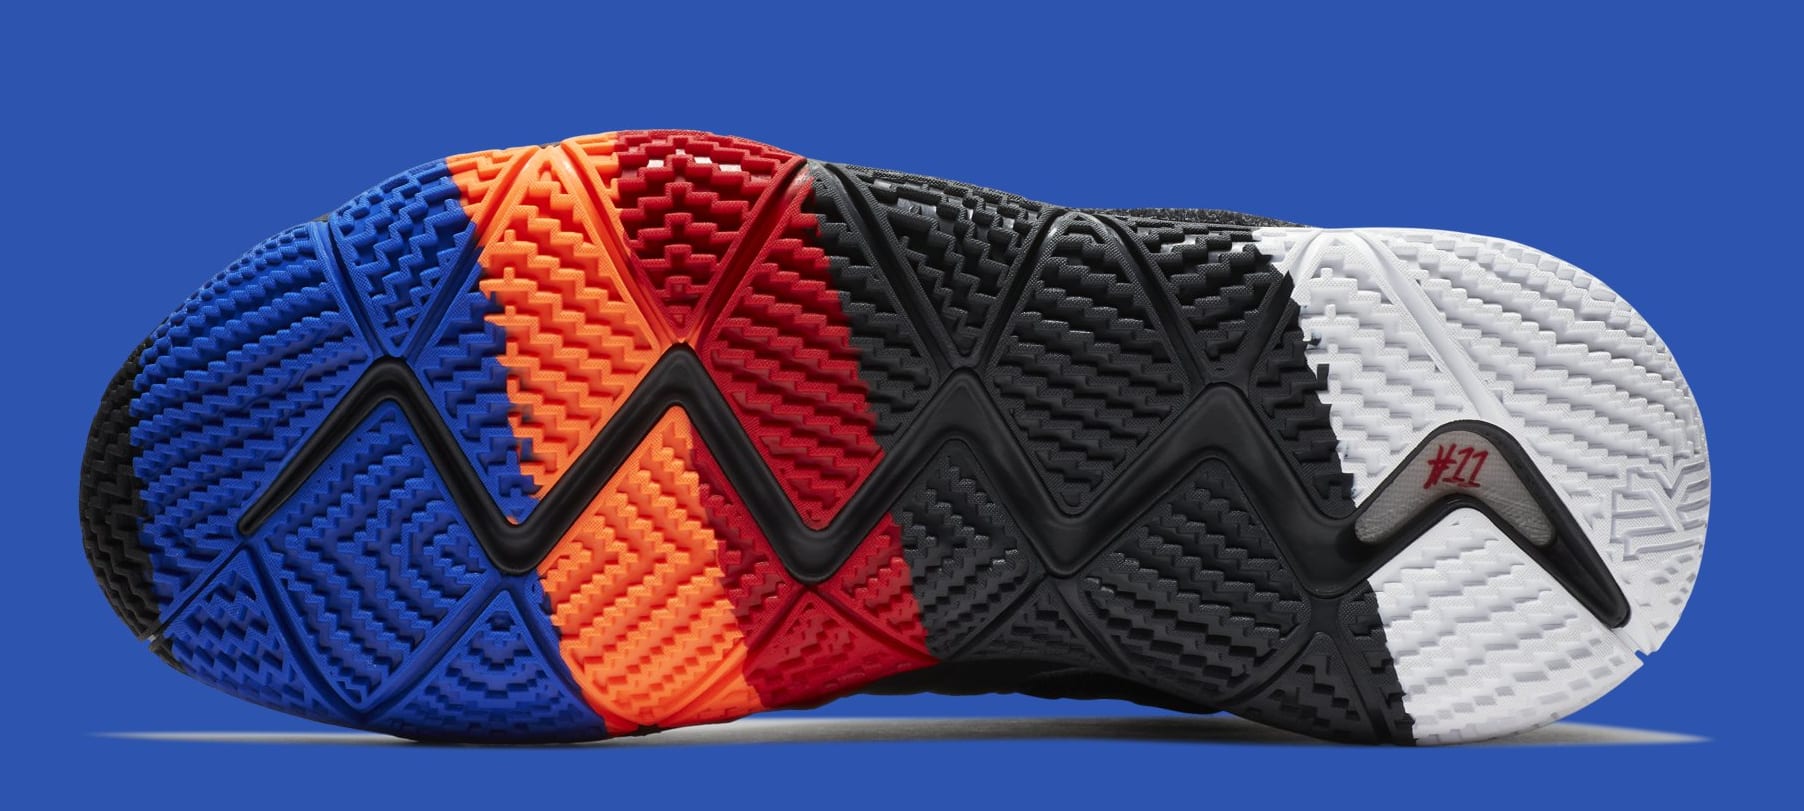 Nike Kyrie 4 &#x27;Year of the Monkey&#x27; 943807-011 (Sole)